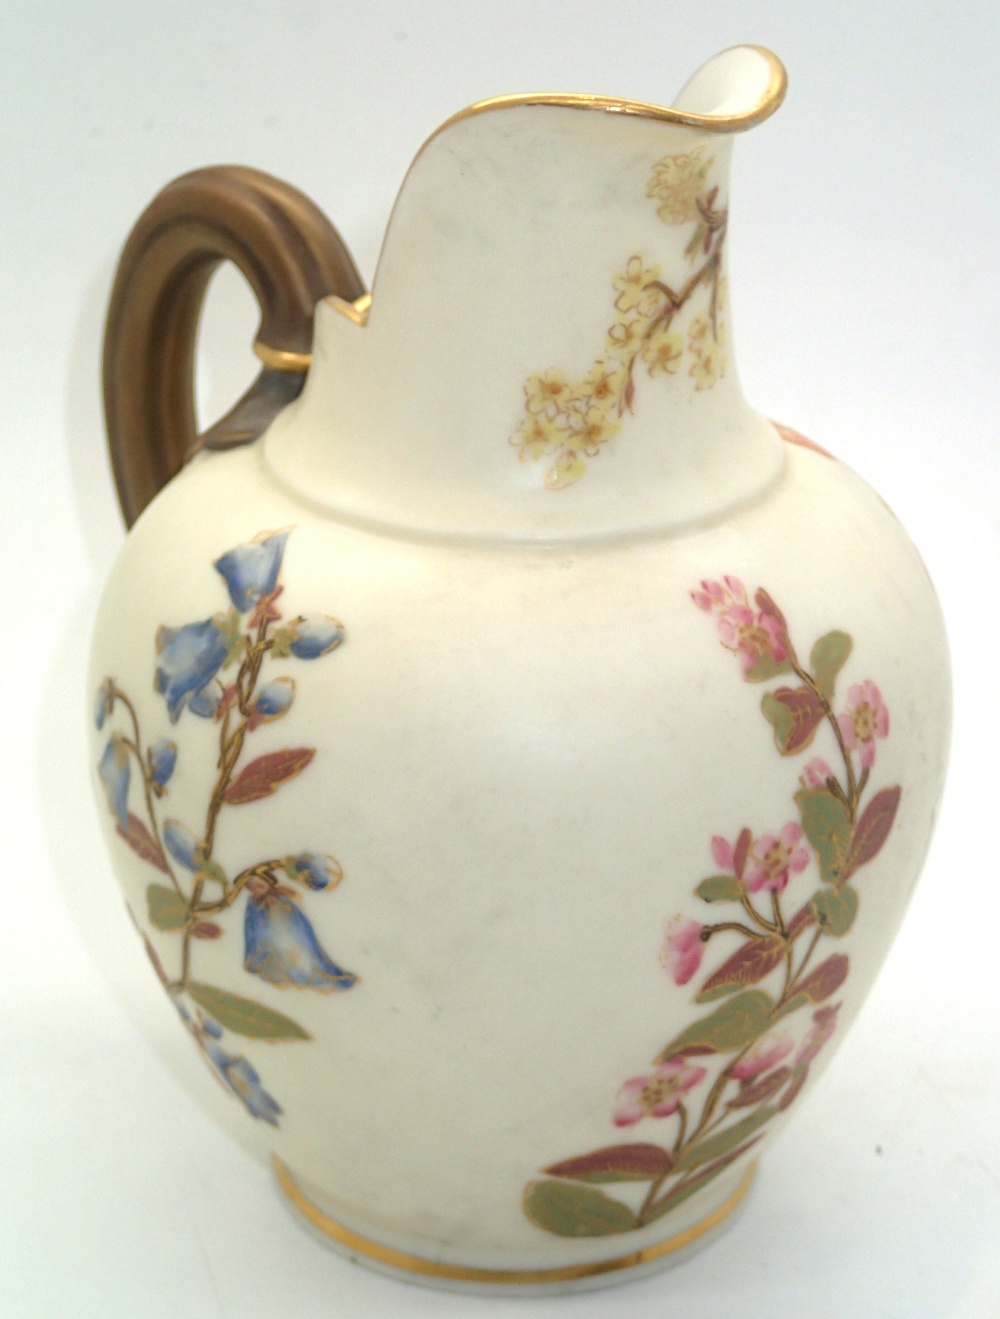 Royal Worcester blush ivory painted jug, pattern 1094, H: 14 cm. P&P group 1 (£16 for the first item